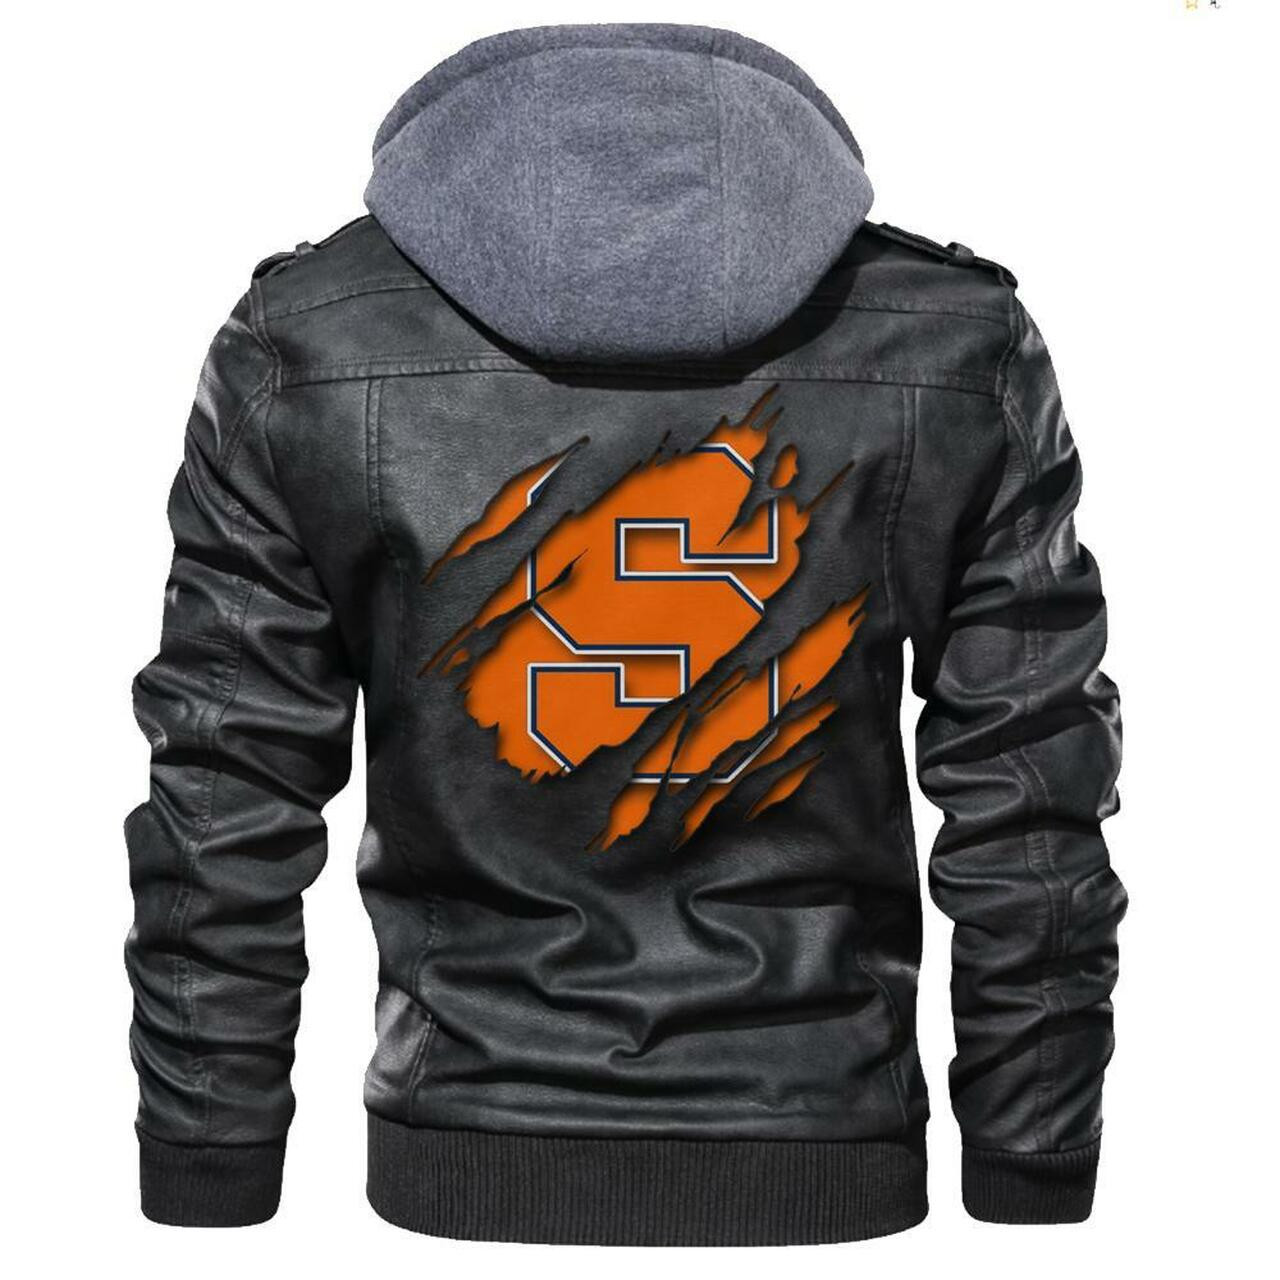 Check out and find the right leather jacket below 225